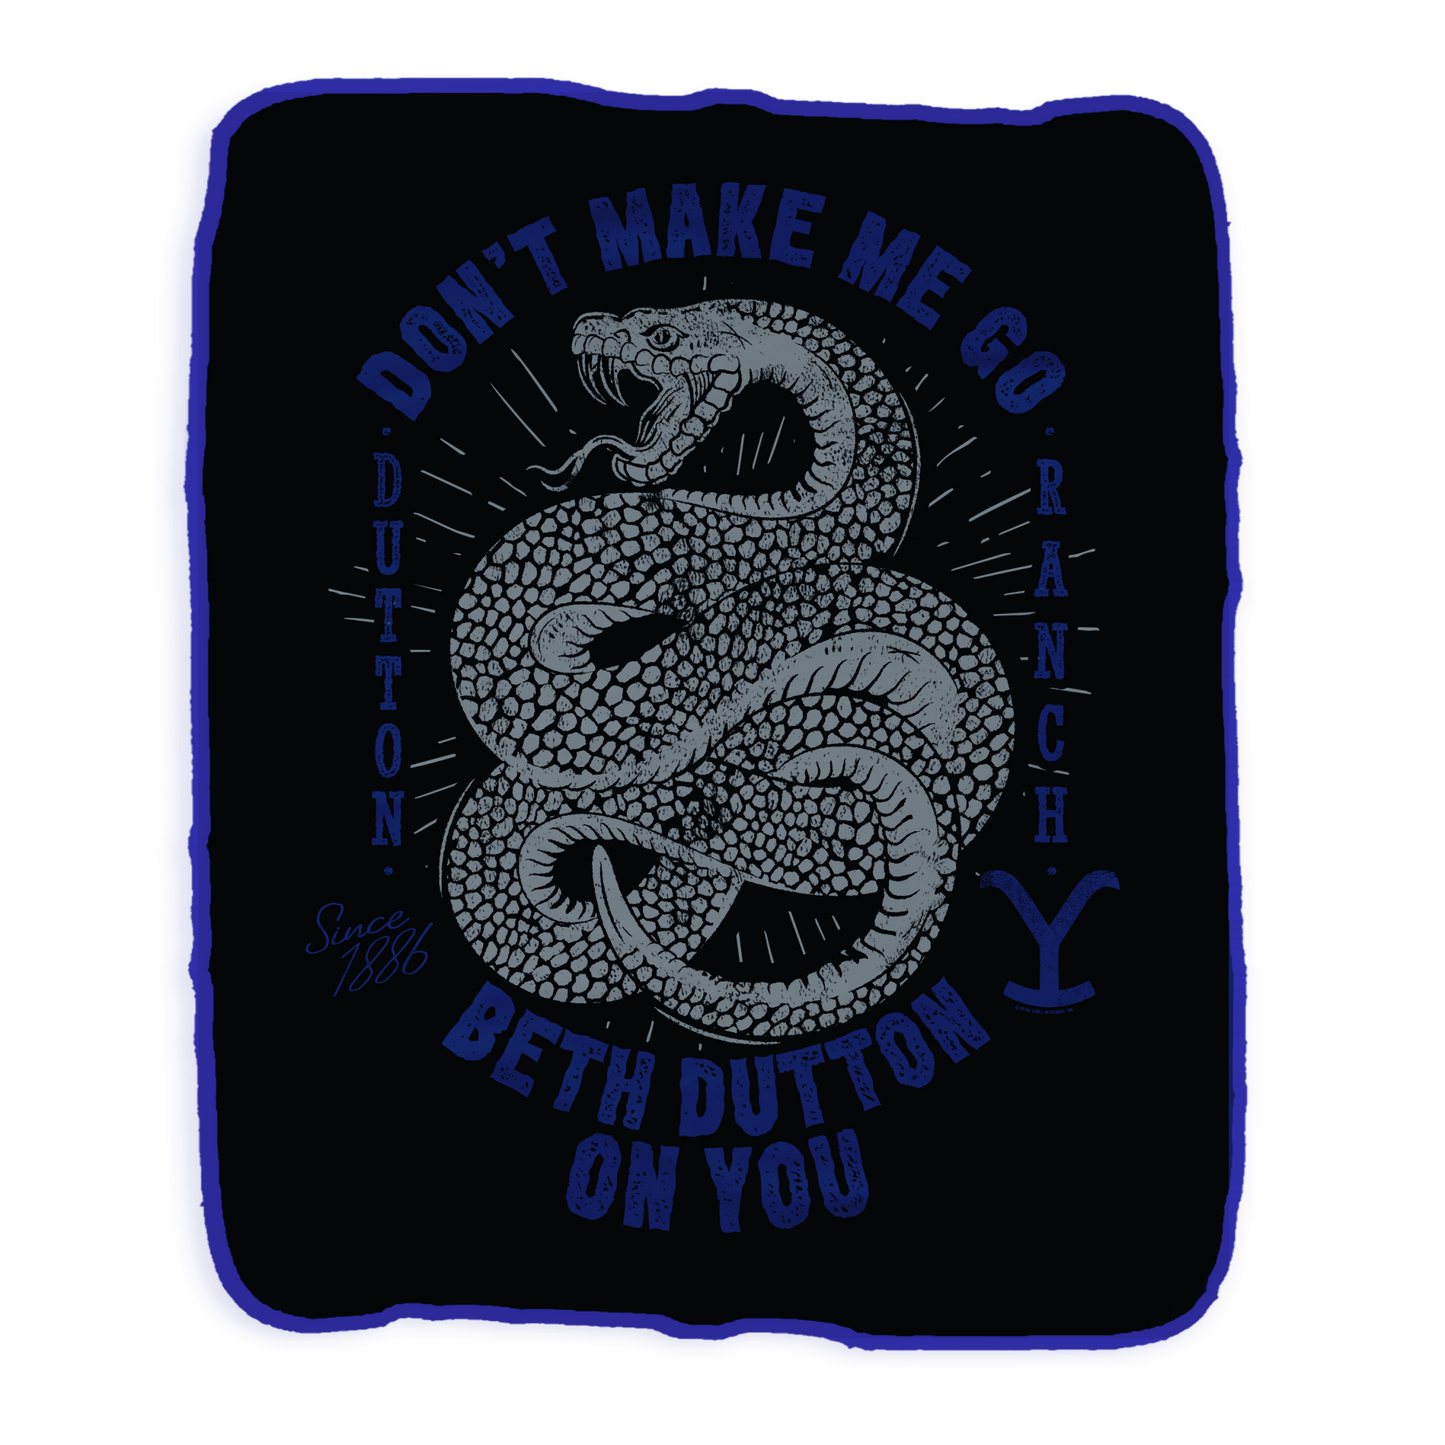 Yellowstone Snake Beth Dutton On You Sherpa Blanket - Paramount Shop